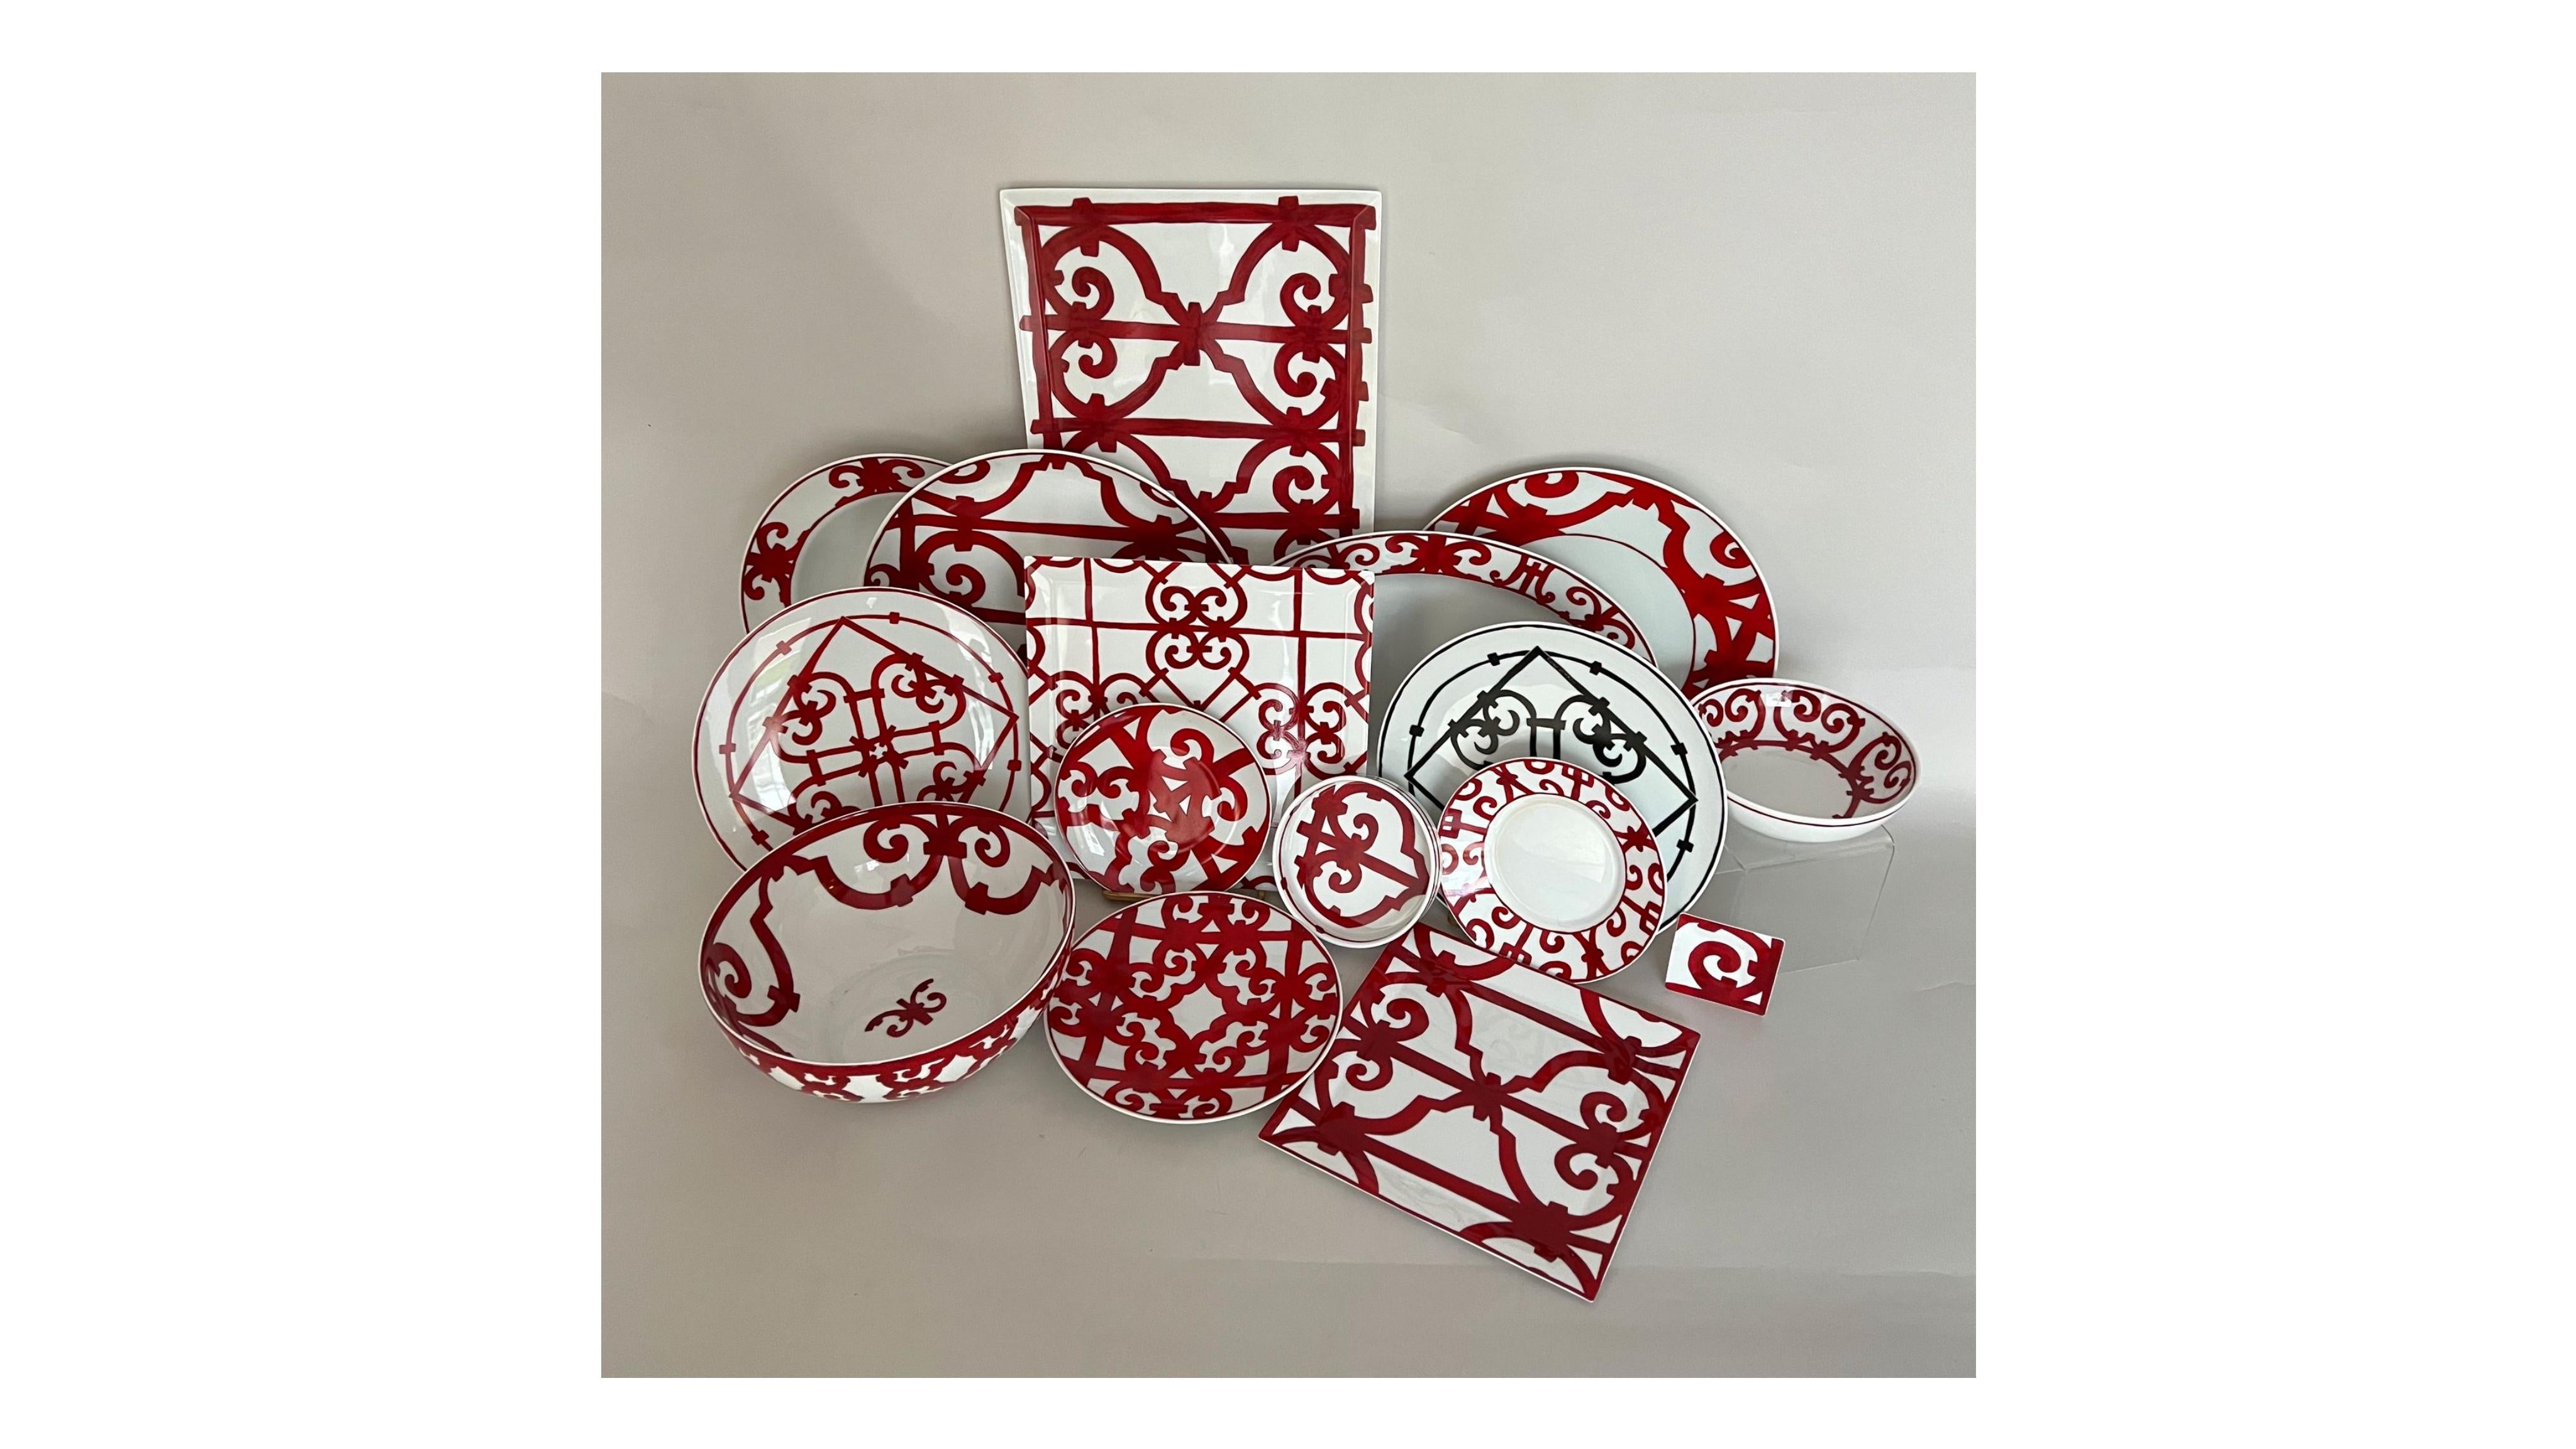 Table service in porcelain
HERMES Paris Part of table service Balcons du Guadalqivir in white porcelain with red or black decoration : 14 dinner plates
16 plates for entremet
8 bowls
6 square presentation plates
6 square plates
2 coasters of